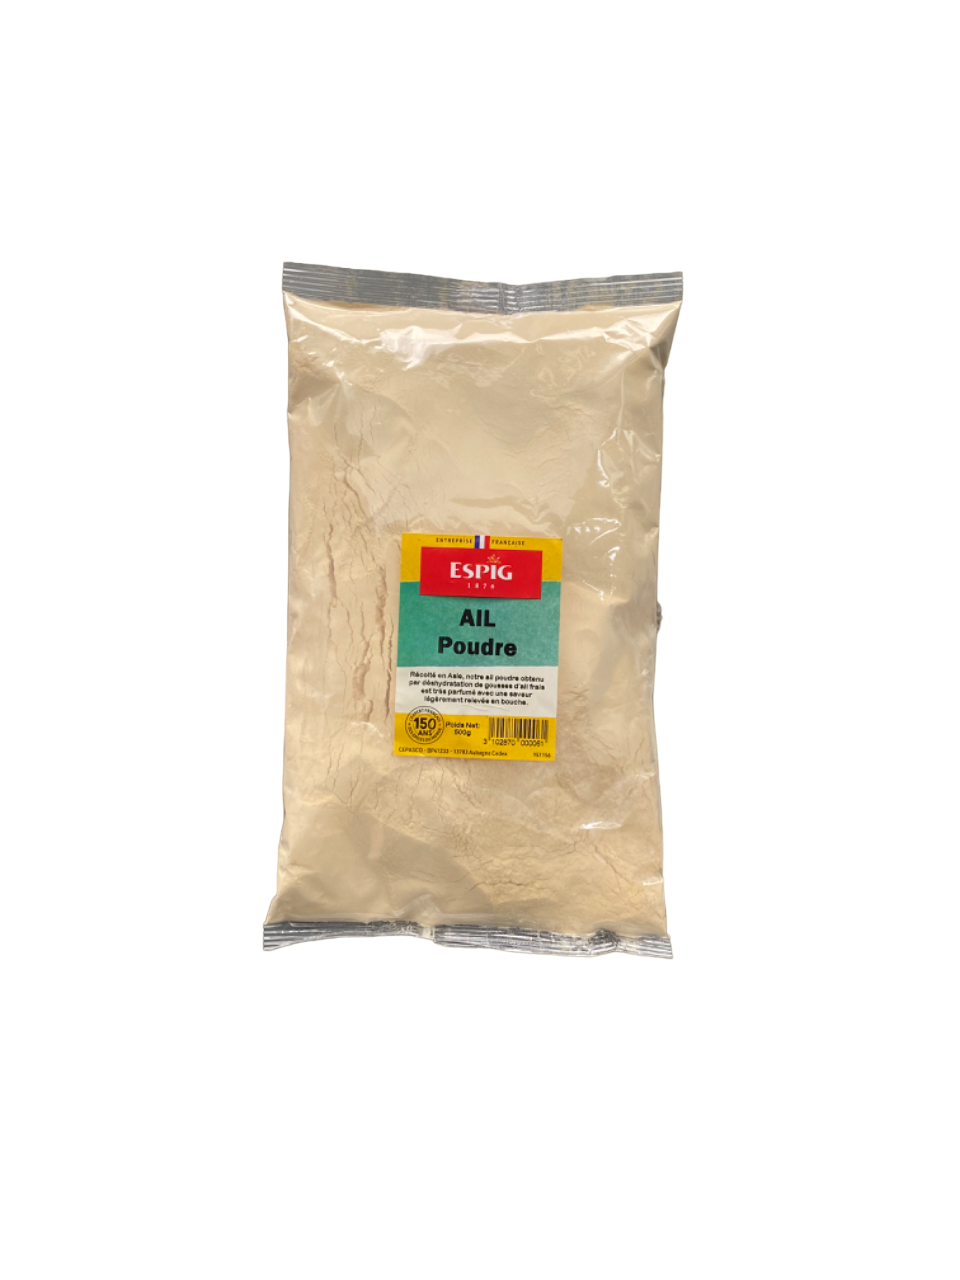 Ail poudre - 500g - ثوم مطحون